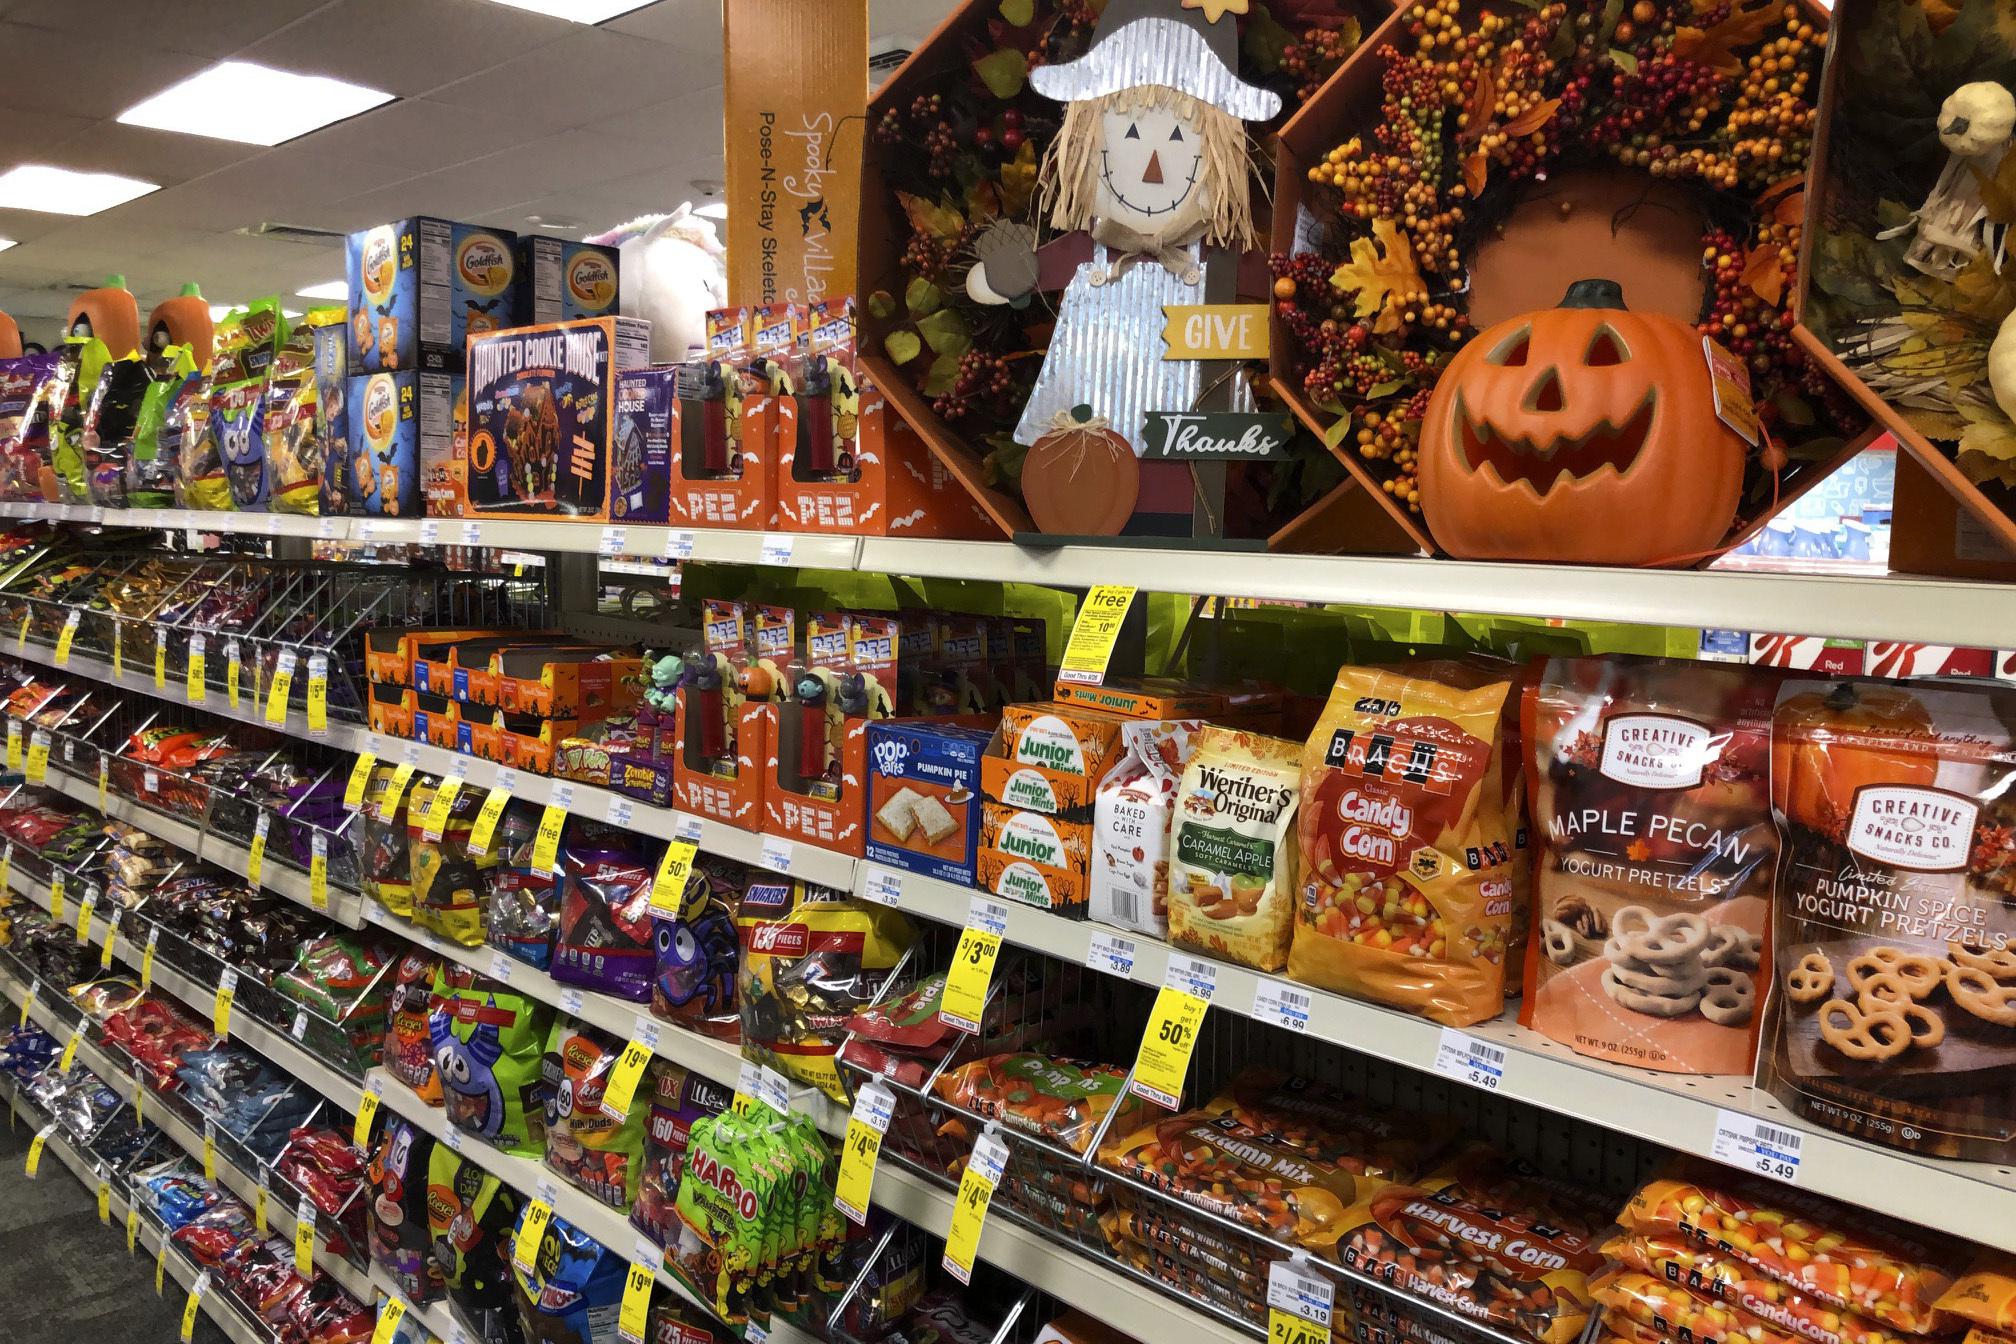 Darien to follow state guidelines for Halloween trickortreating